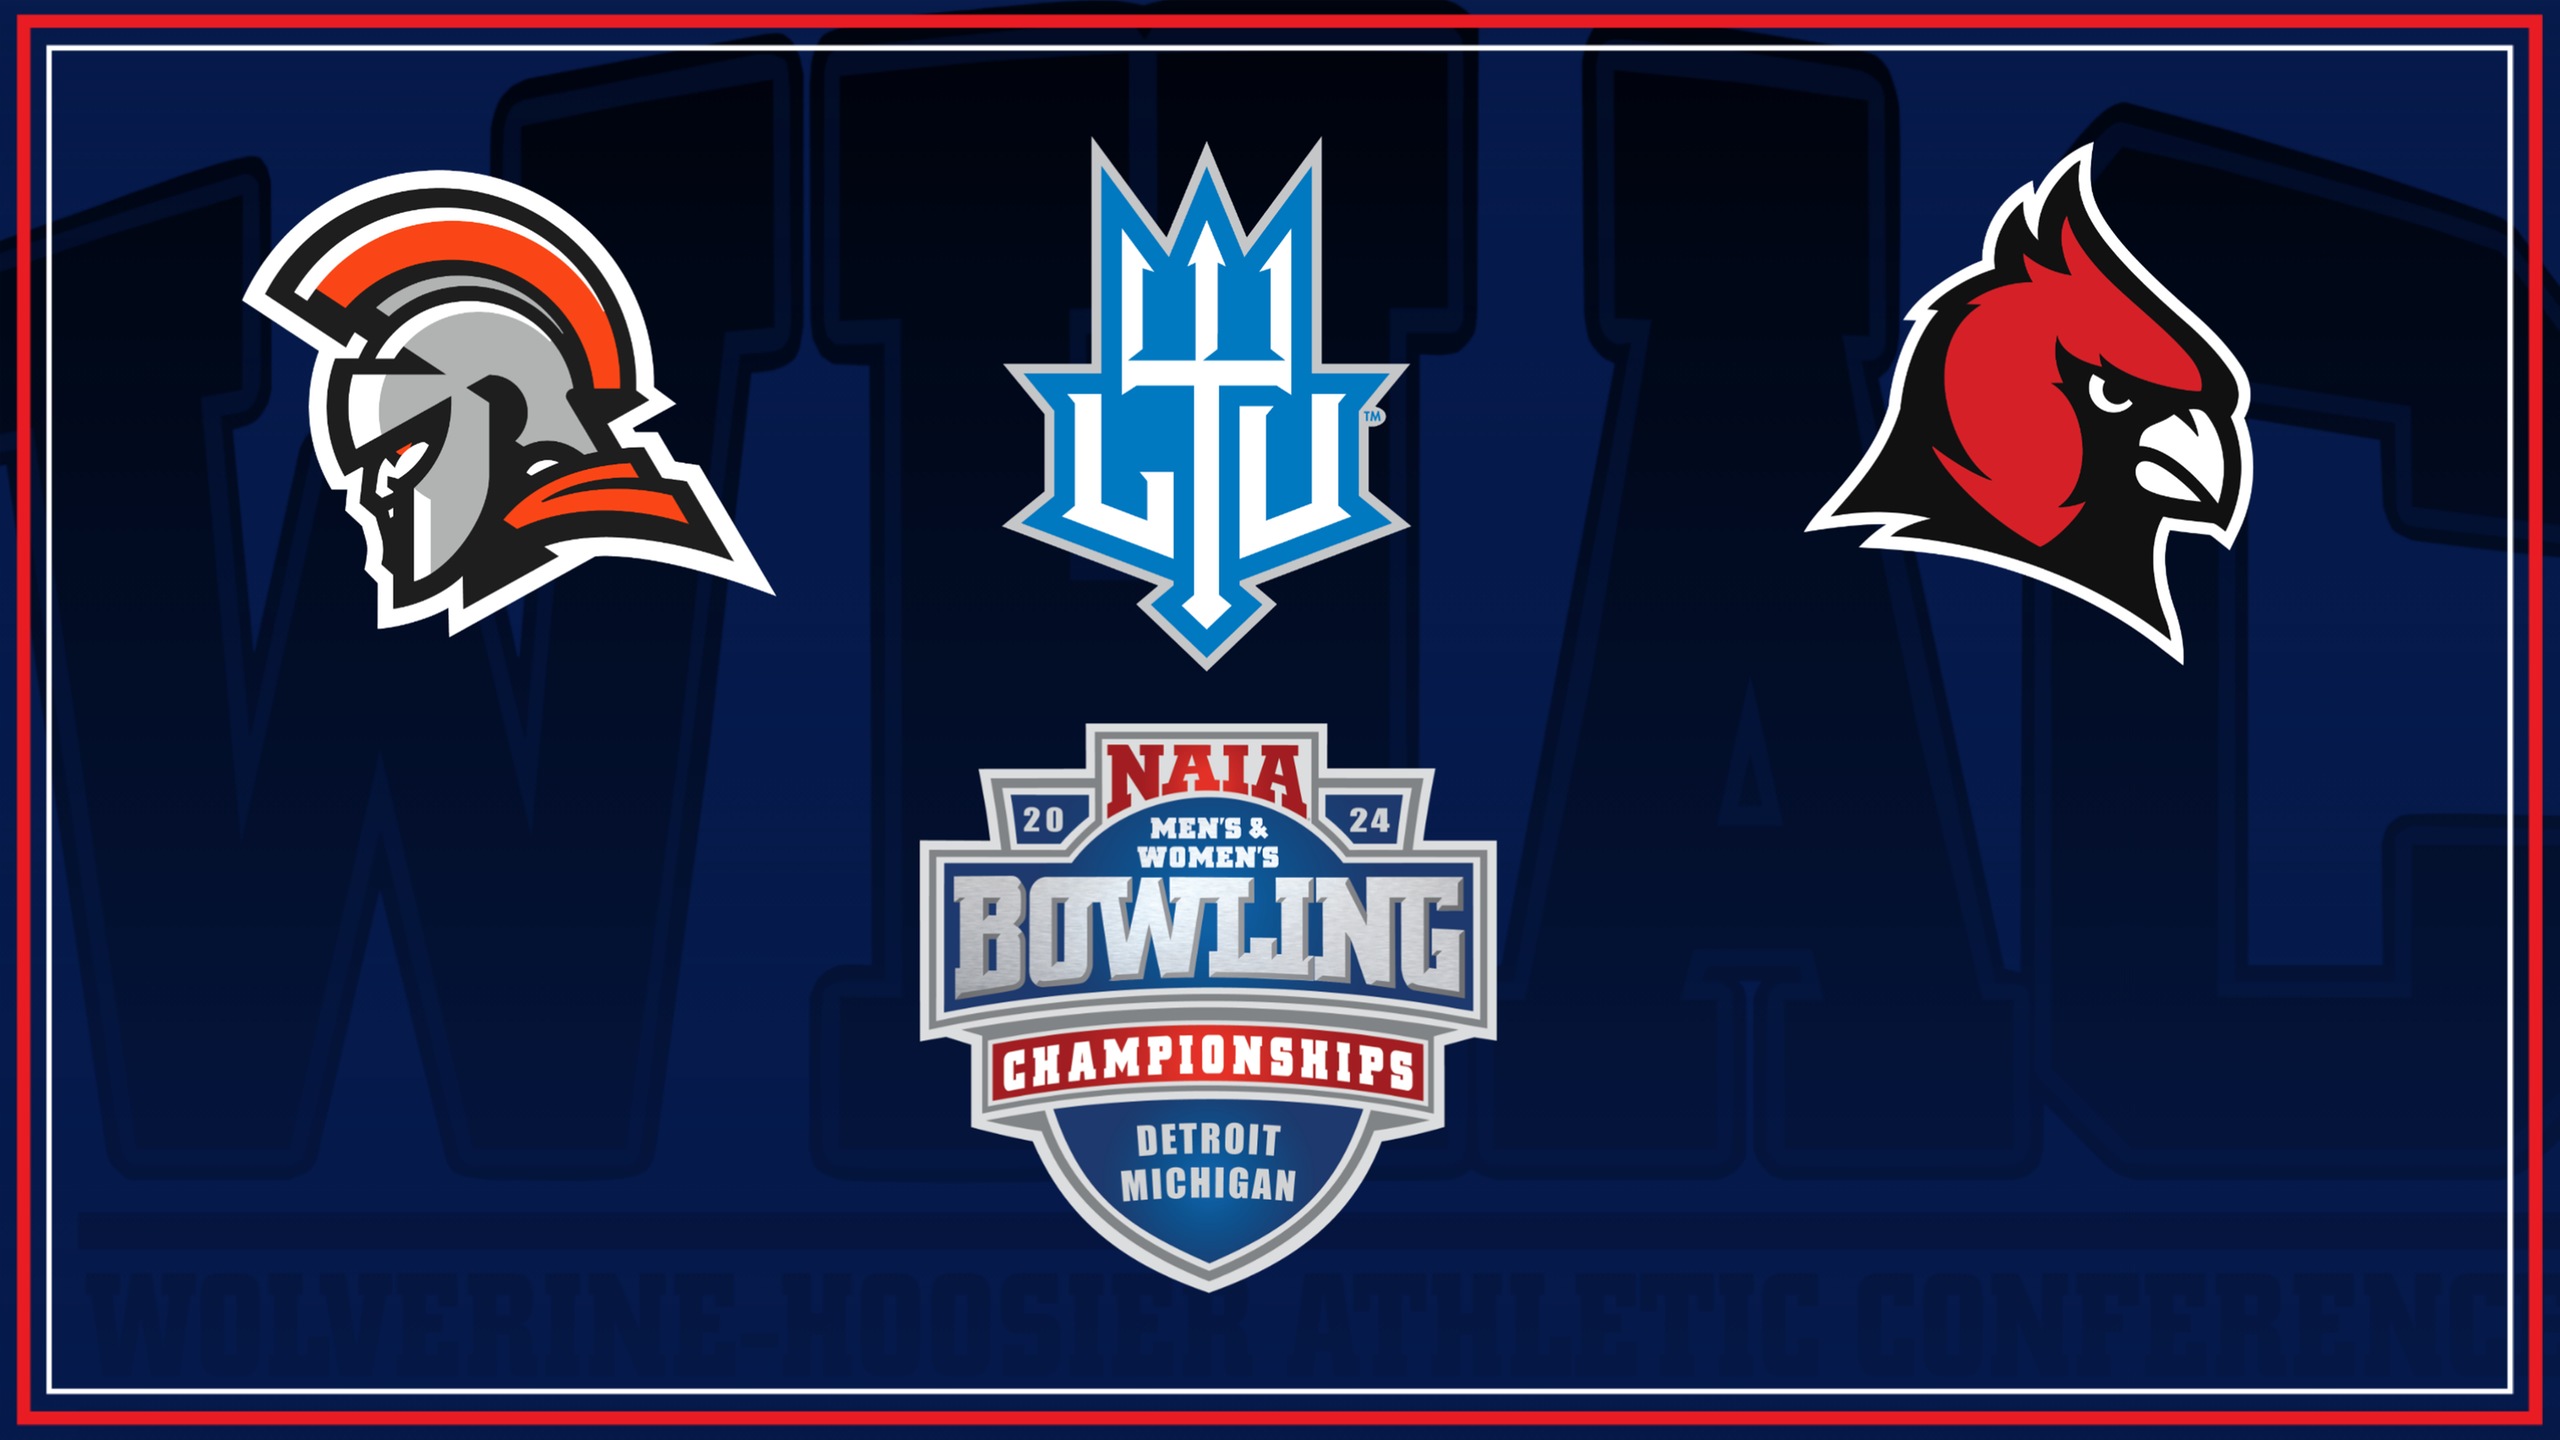 WHAC Teams Compete in NAIA Bowling Nationals March 21-23